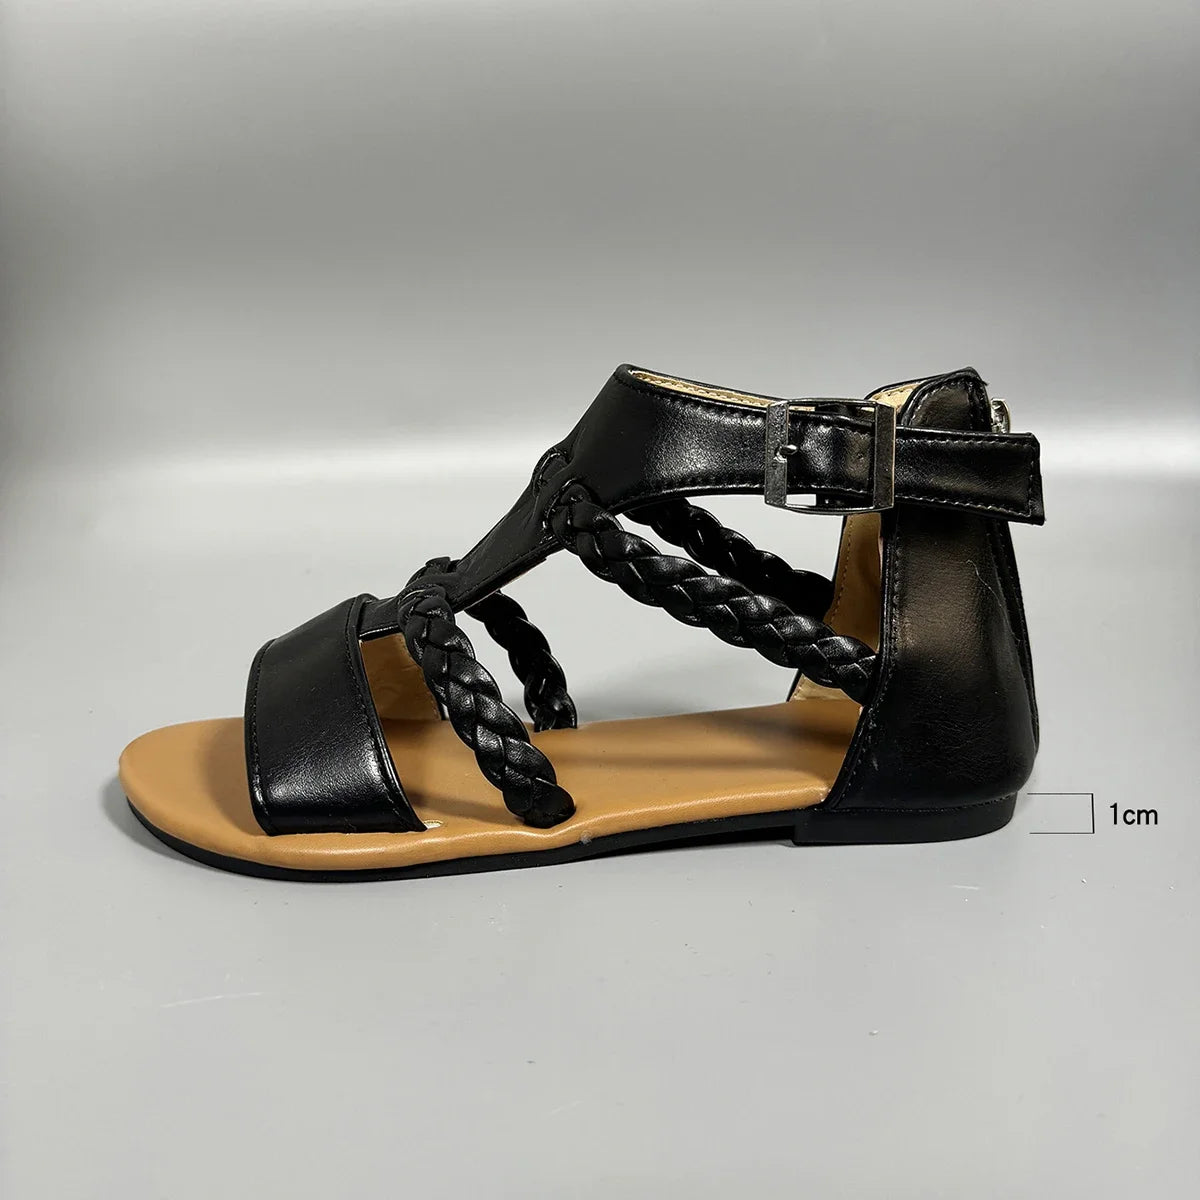 Buckle Closure Casual Rome Style Flat Gladiator Sandals